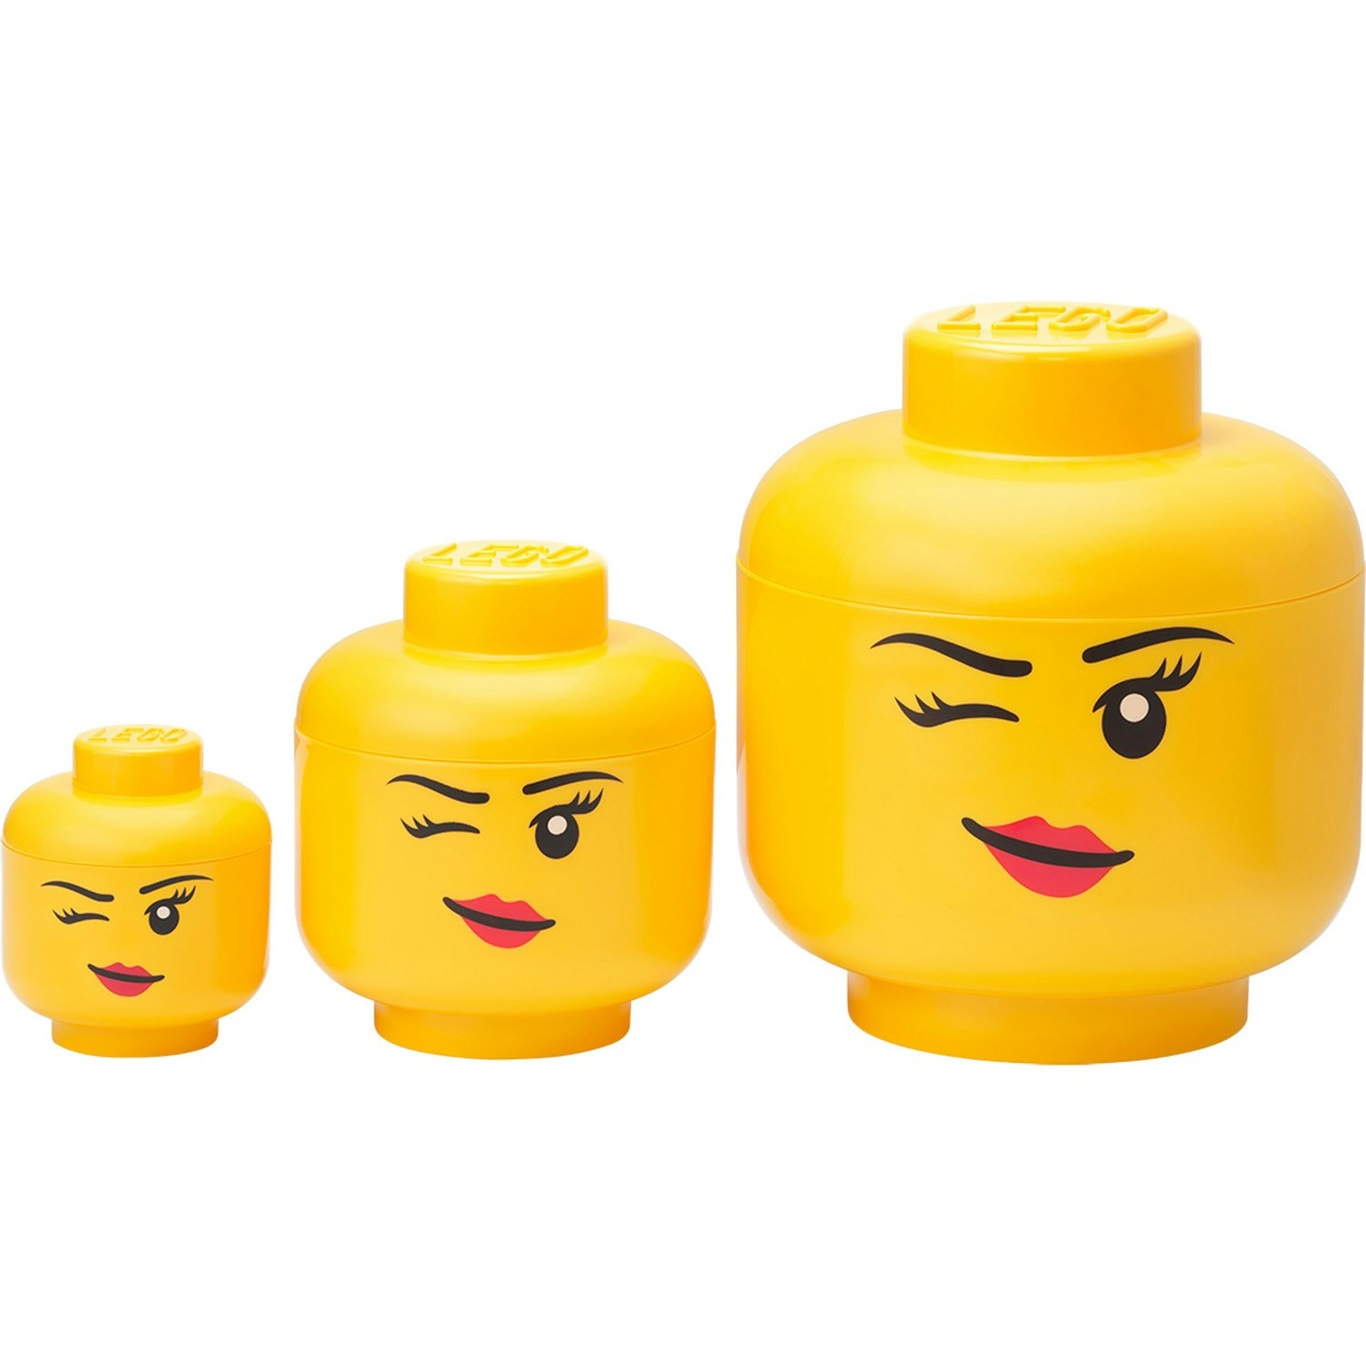 LEGO® Storage Box Head Collection 3 Pieces, Winking